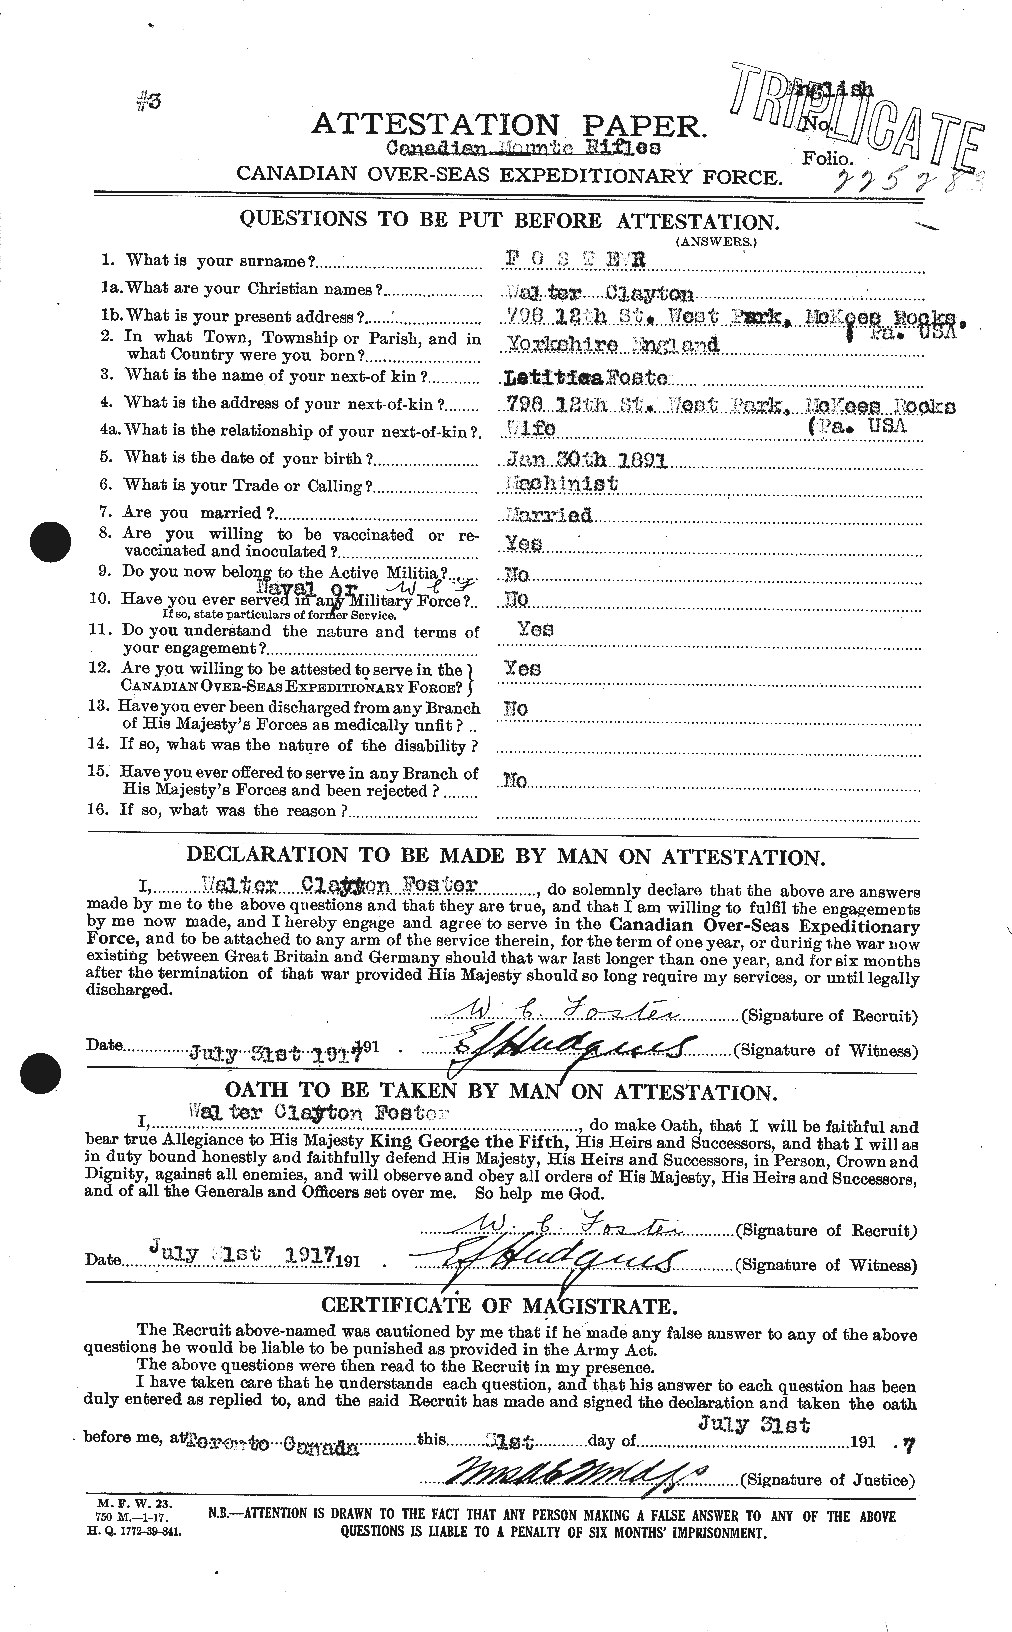 Personnel Records of the First World War - CEF 335254a